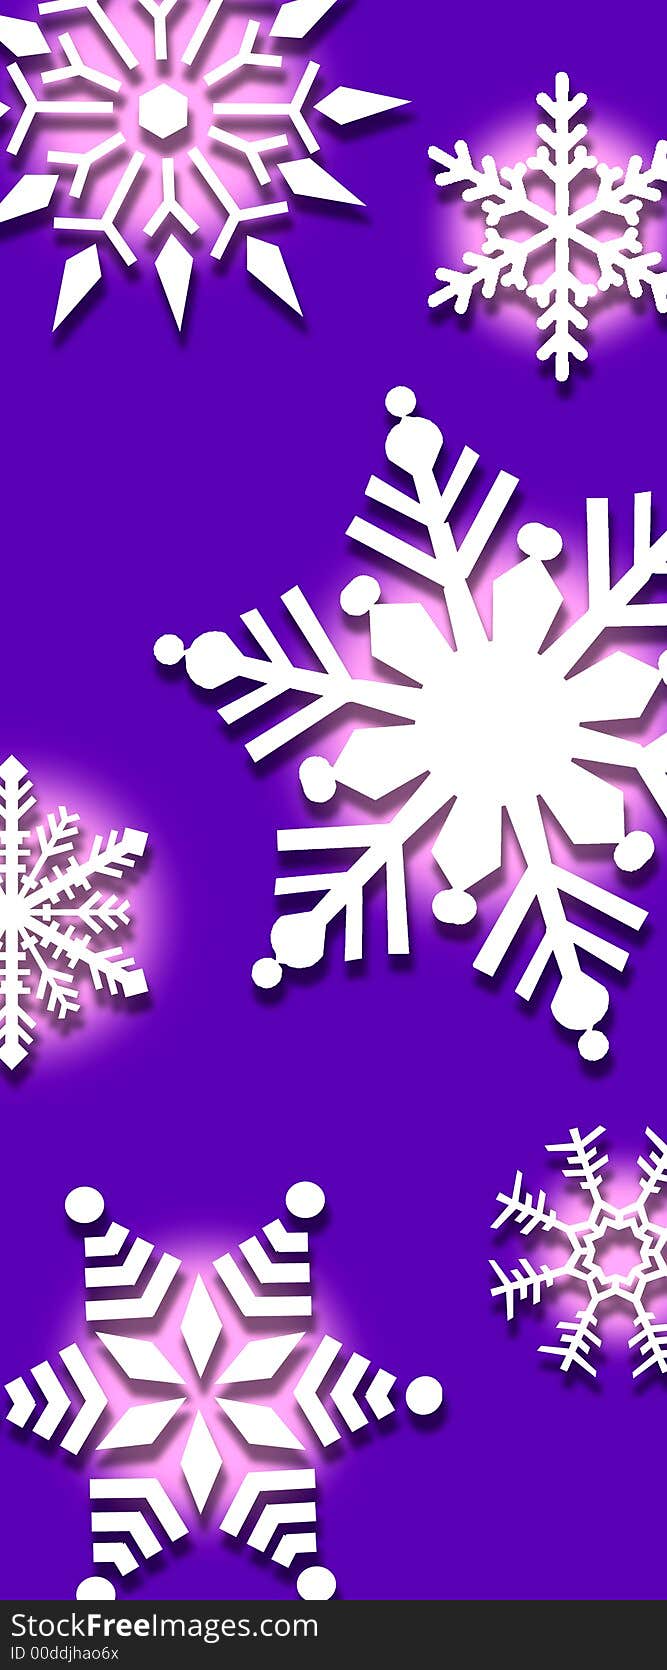 An illustrated background of snowflakes